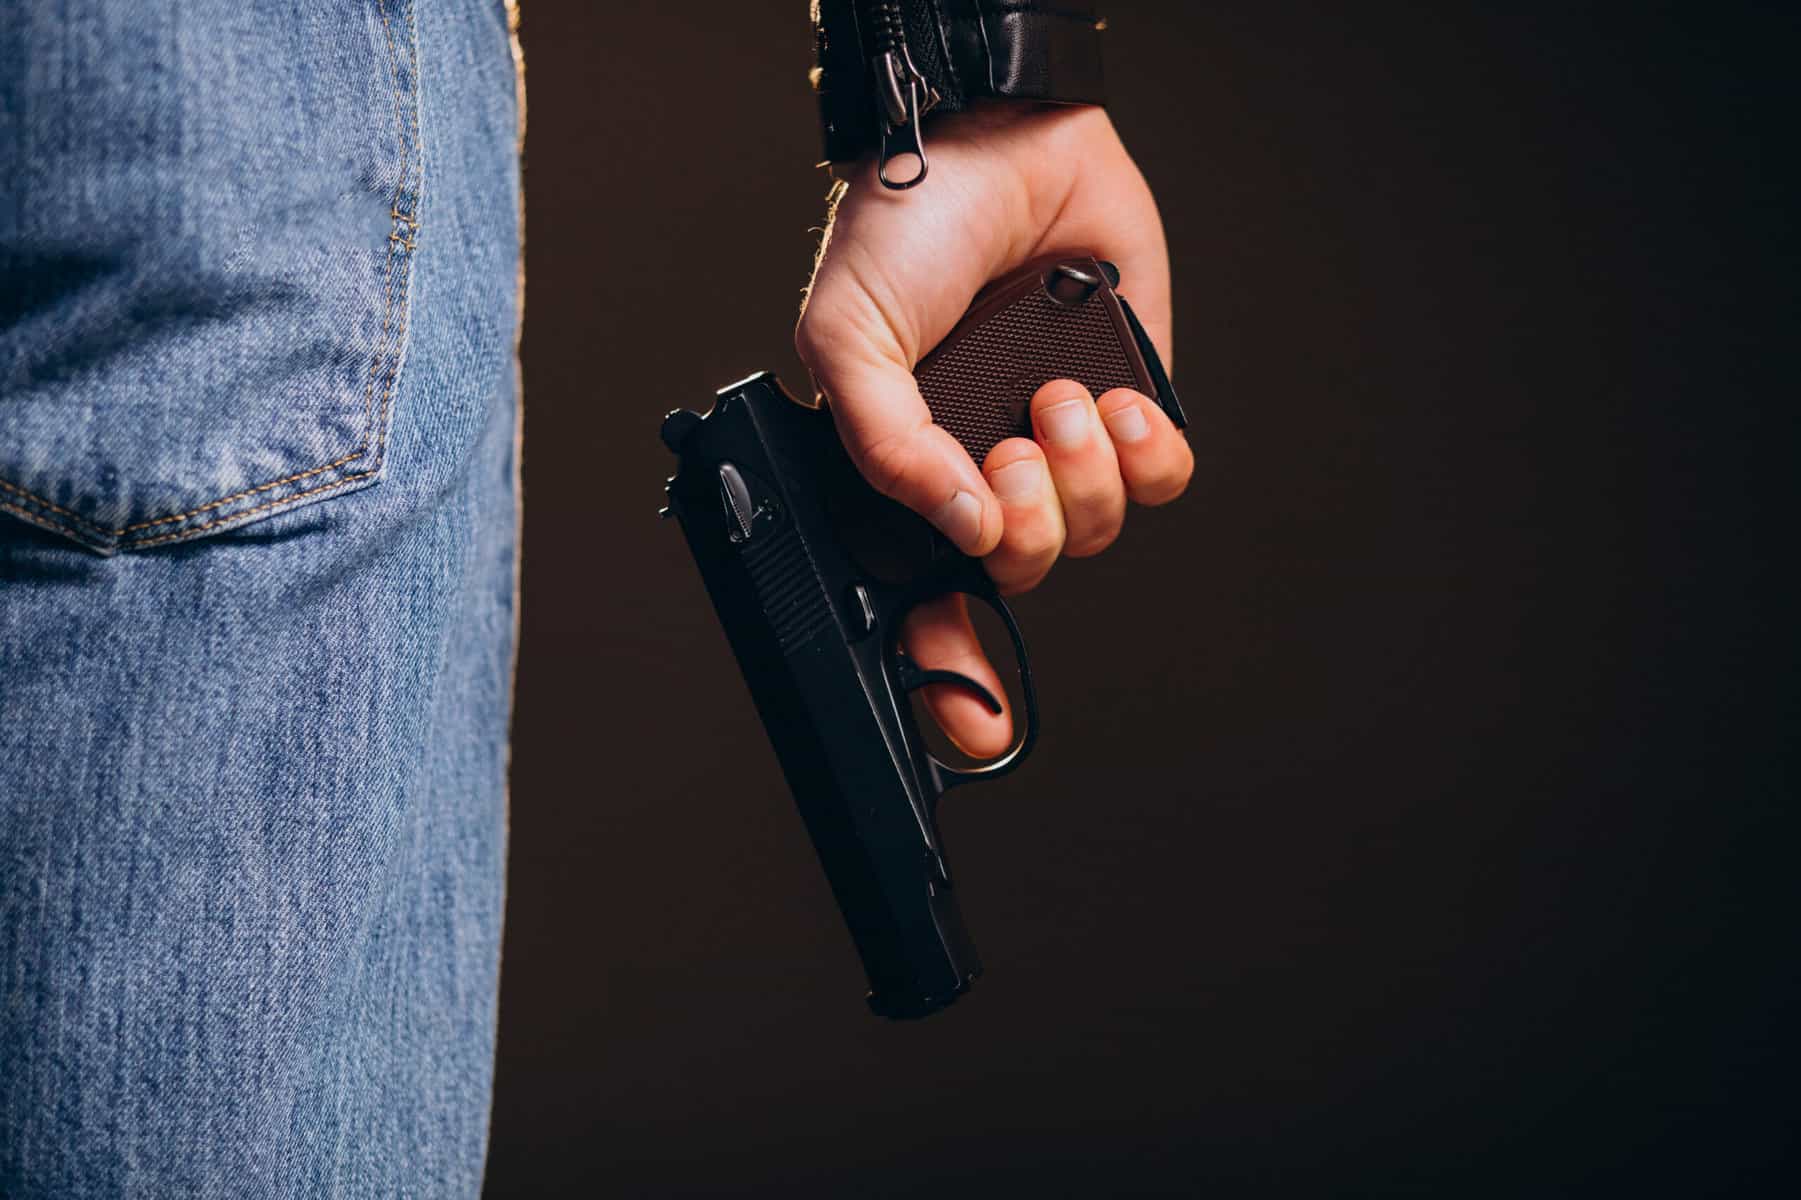 view of a man from the back showing him holding a hand gun down at his side.